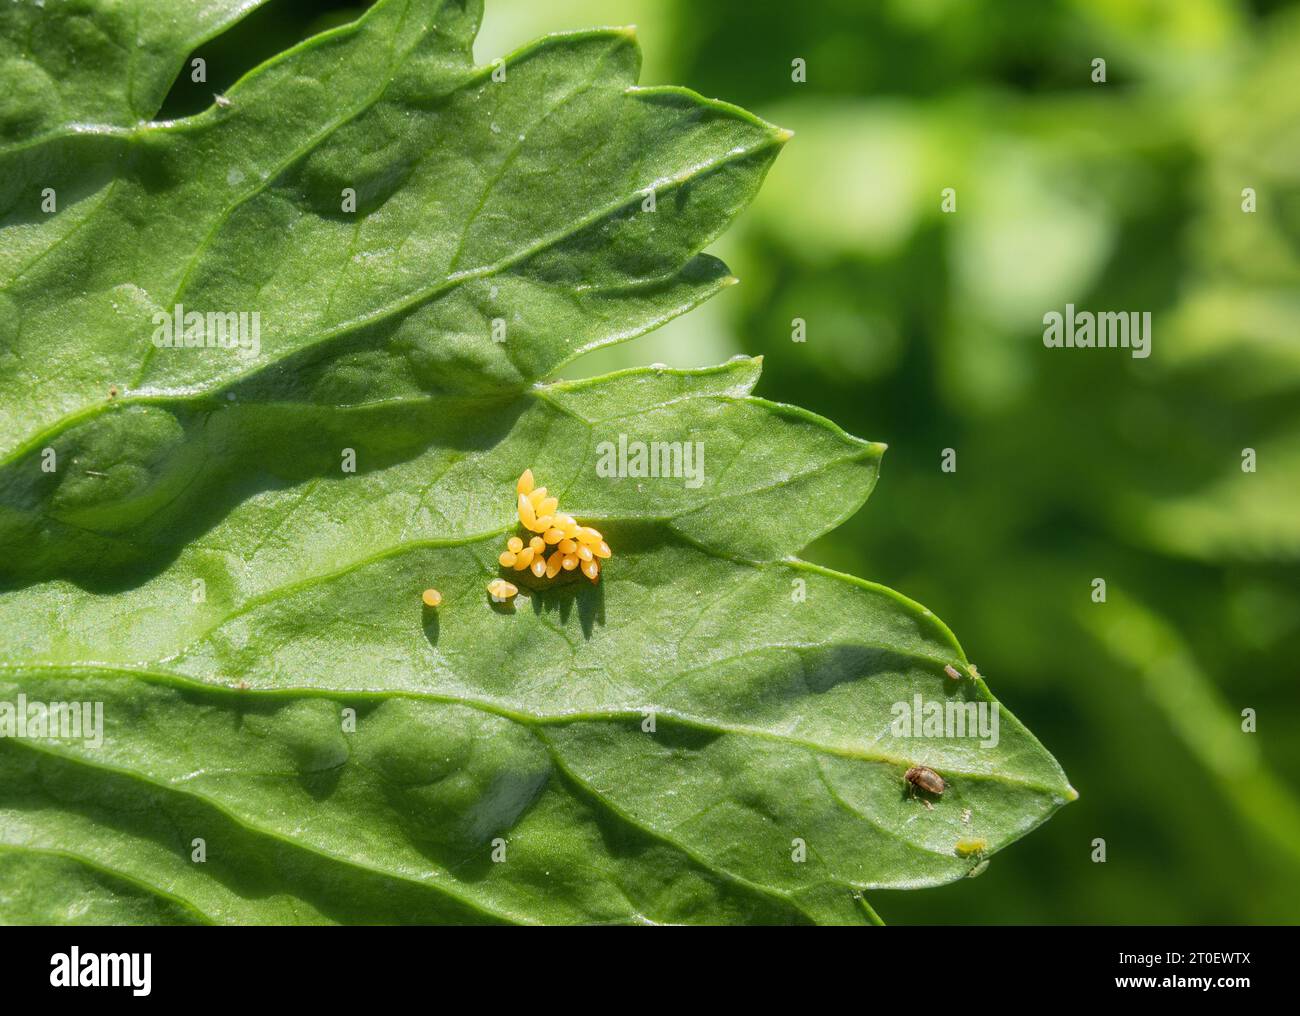 Ladybug egg cluster on celery leaf with defocused foliage. Group of yellow oval-shaped eggs. Known as ladybird, lady beetle, lady clock and lady fly. Stock Photo